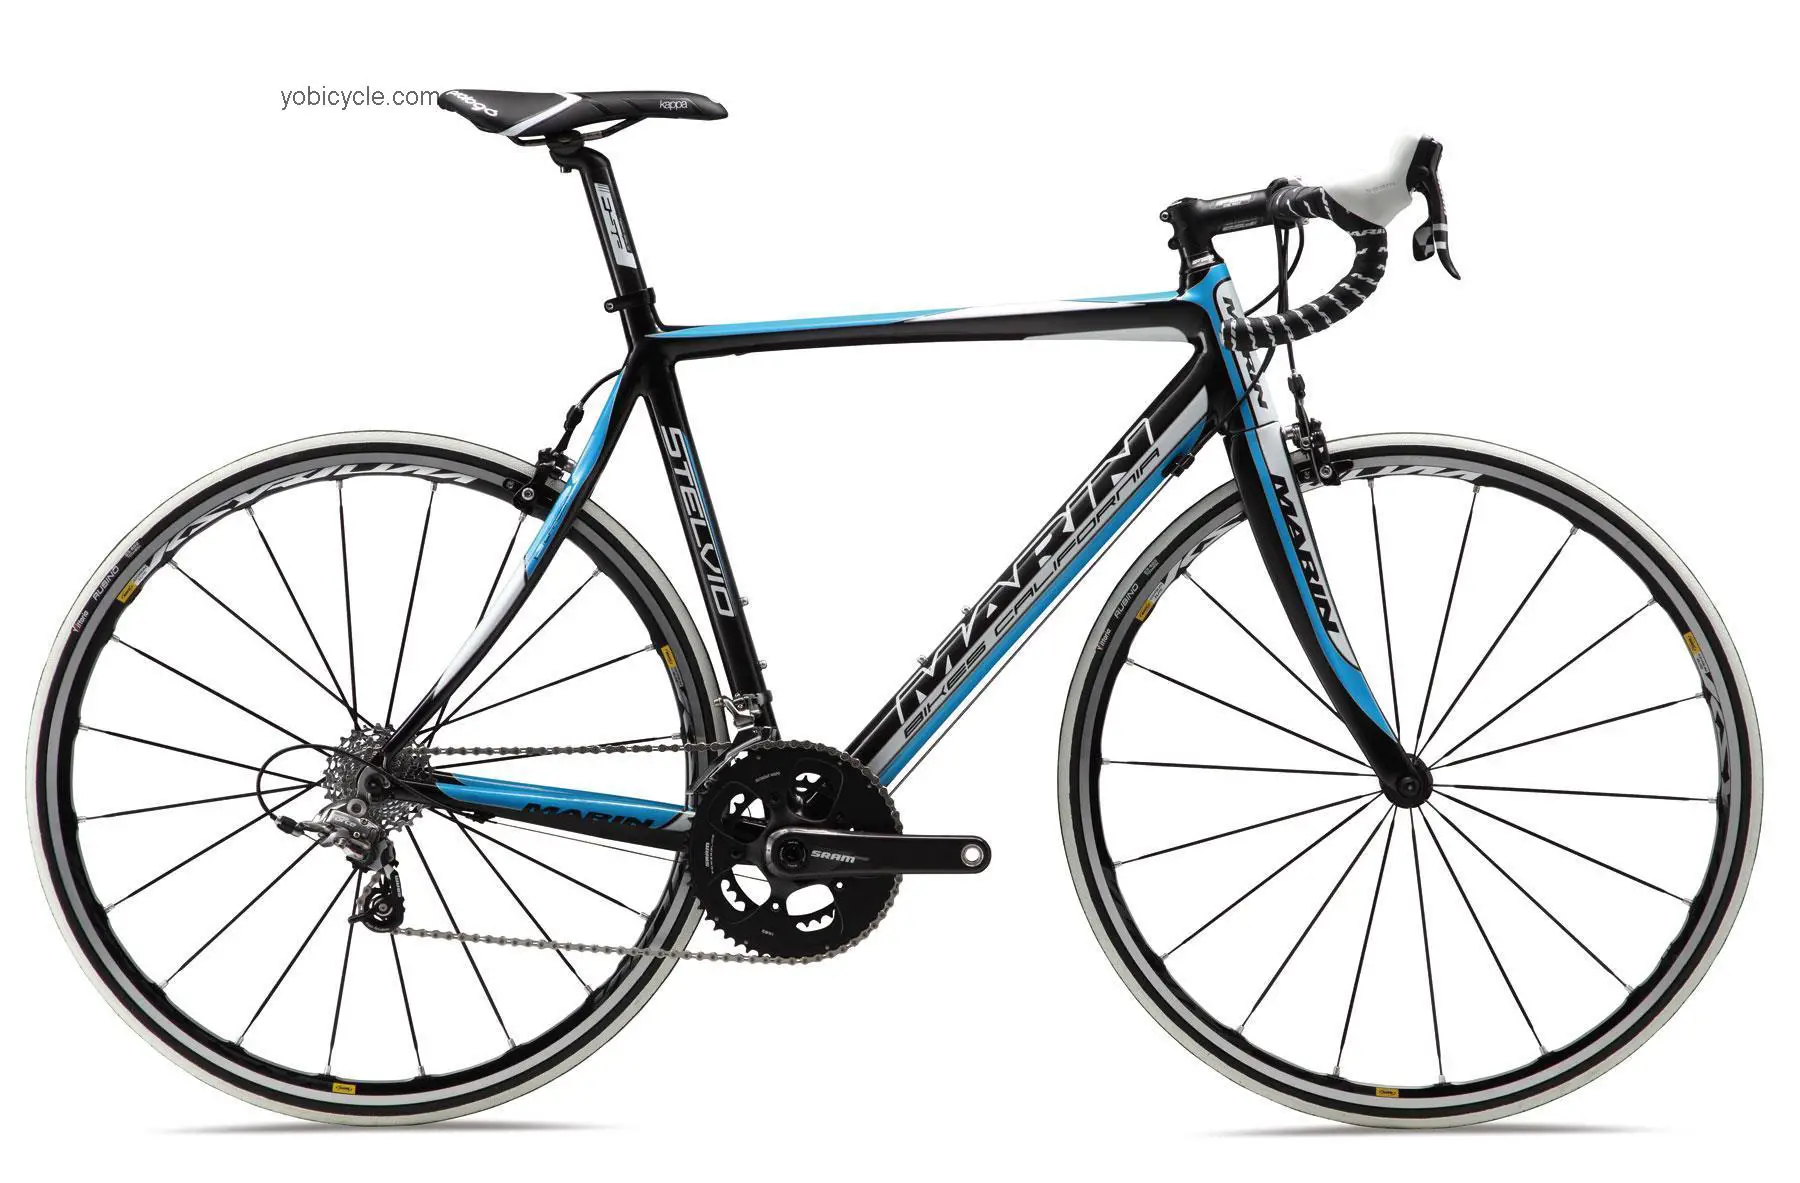 Marin Stelvio T3 Force 2012 comparison online with competitors